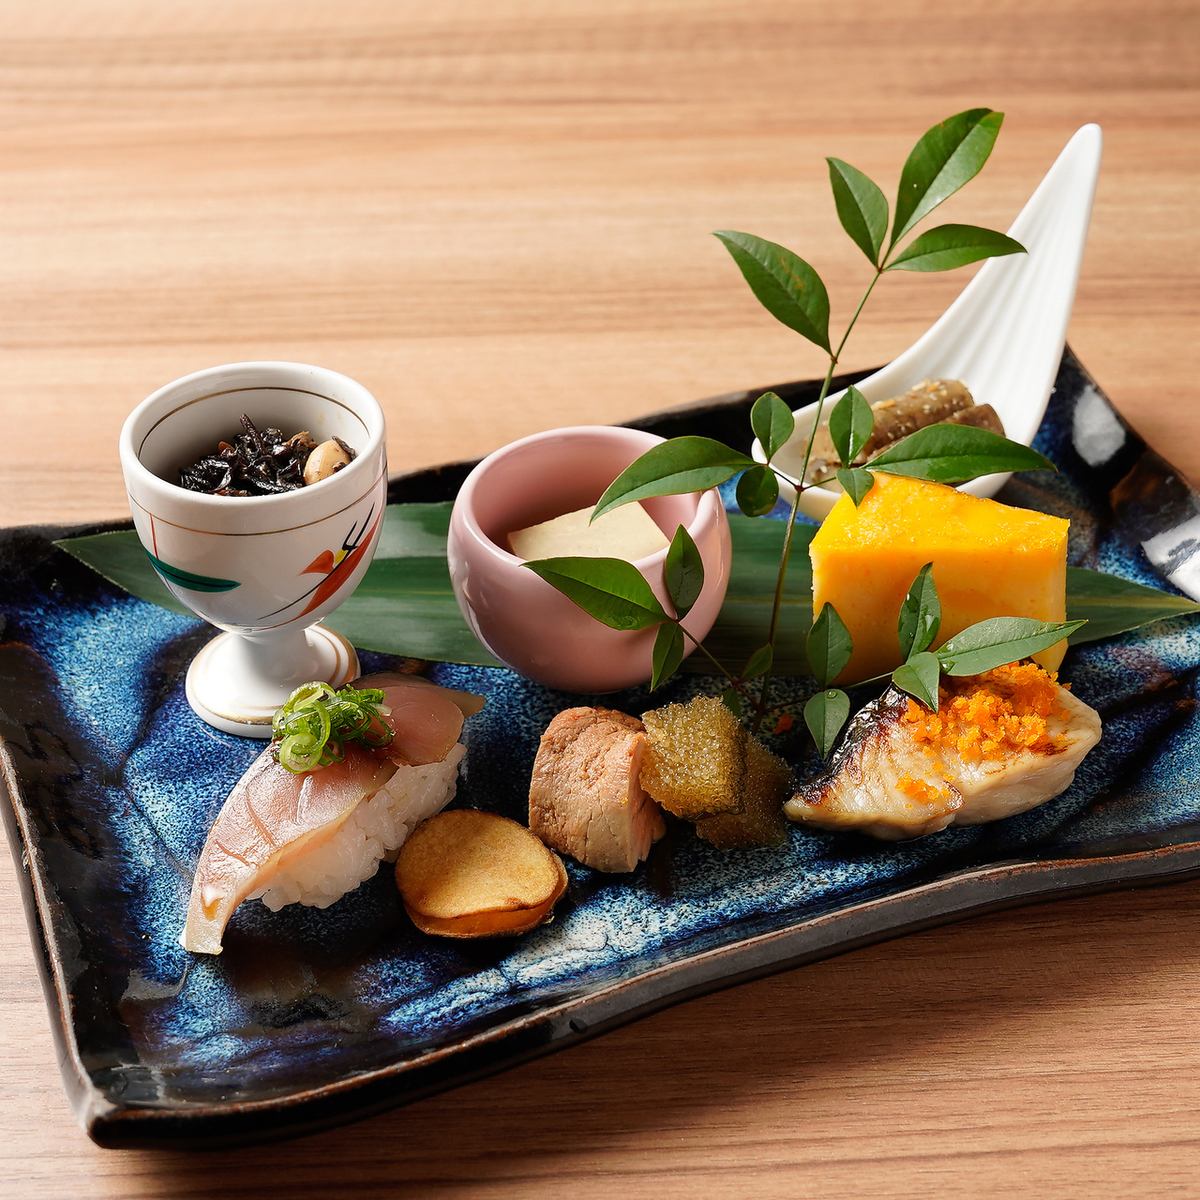 We offer seasonal dishes as well as sake and shochu.